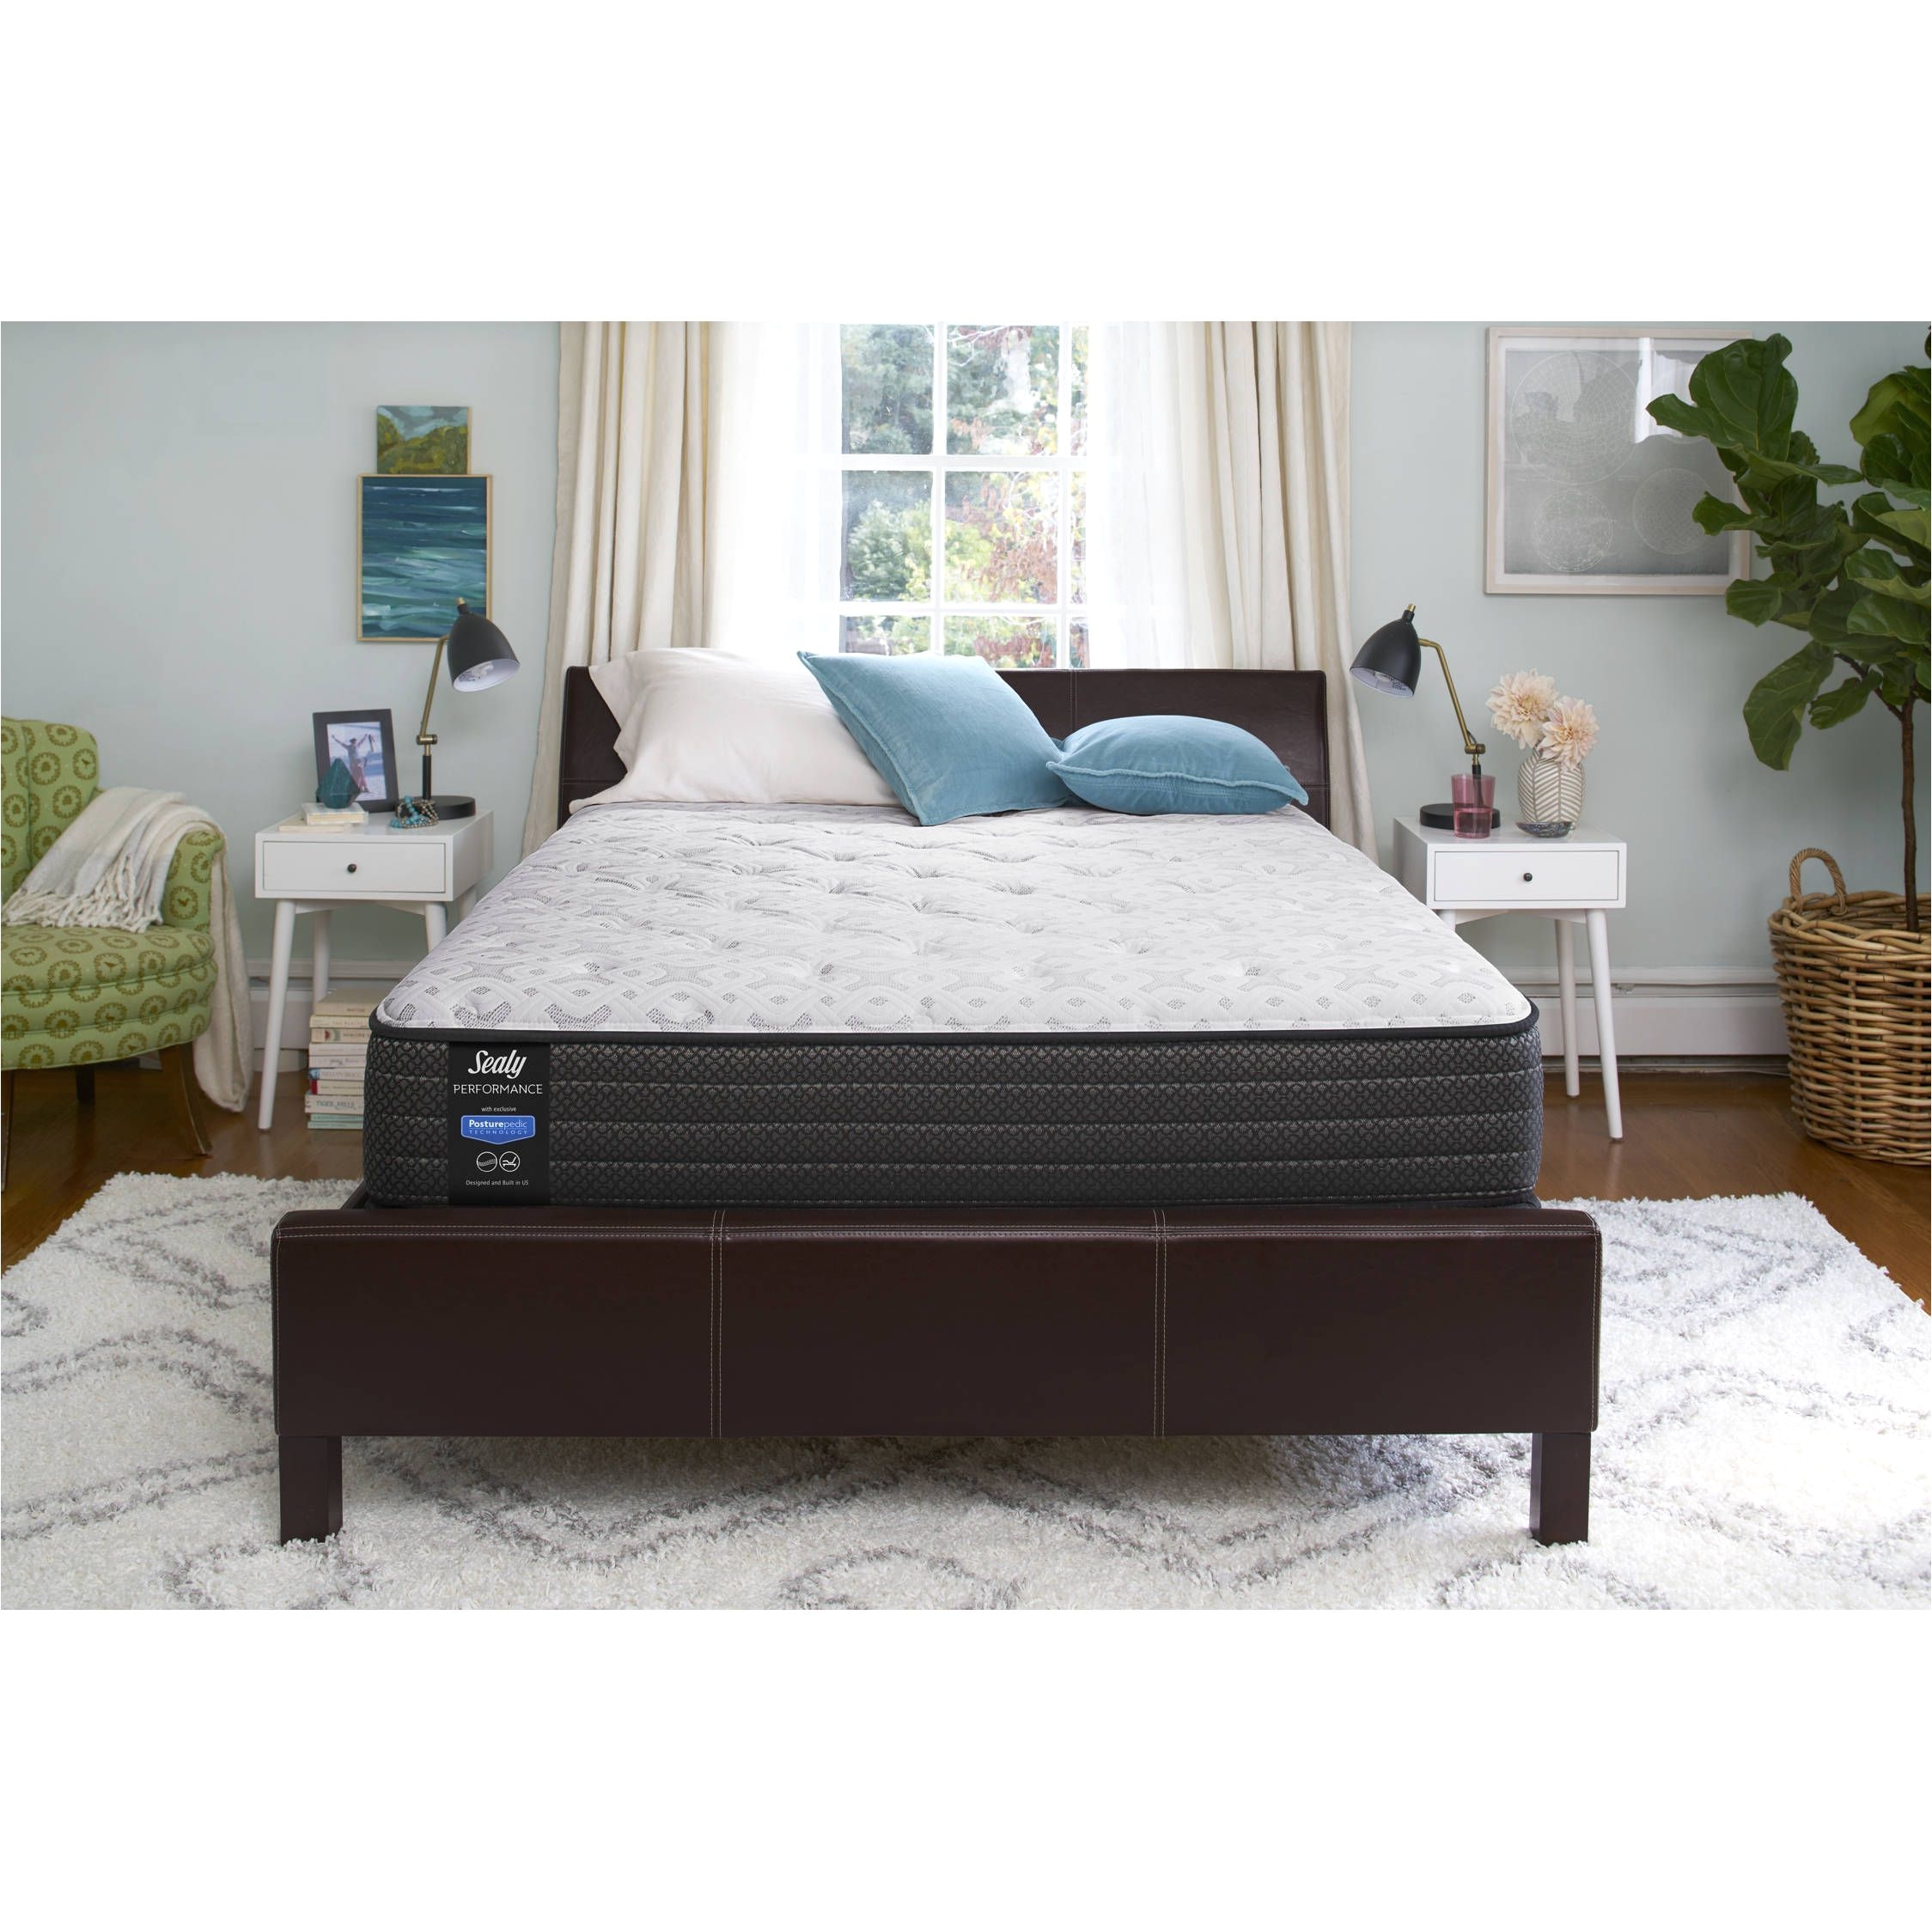 sealy response performance 12 inch plush queen mattress set 9 inch high profile foundation white